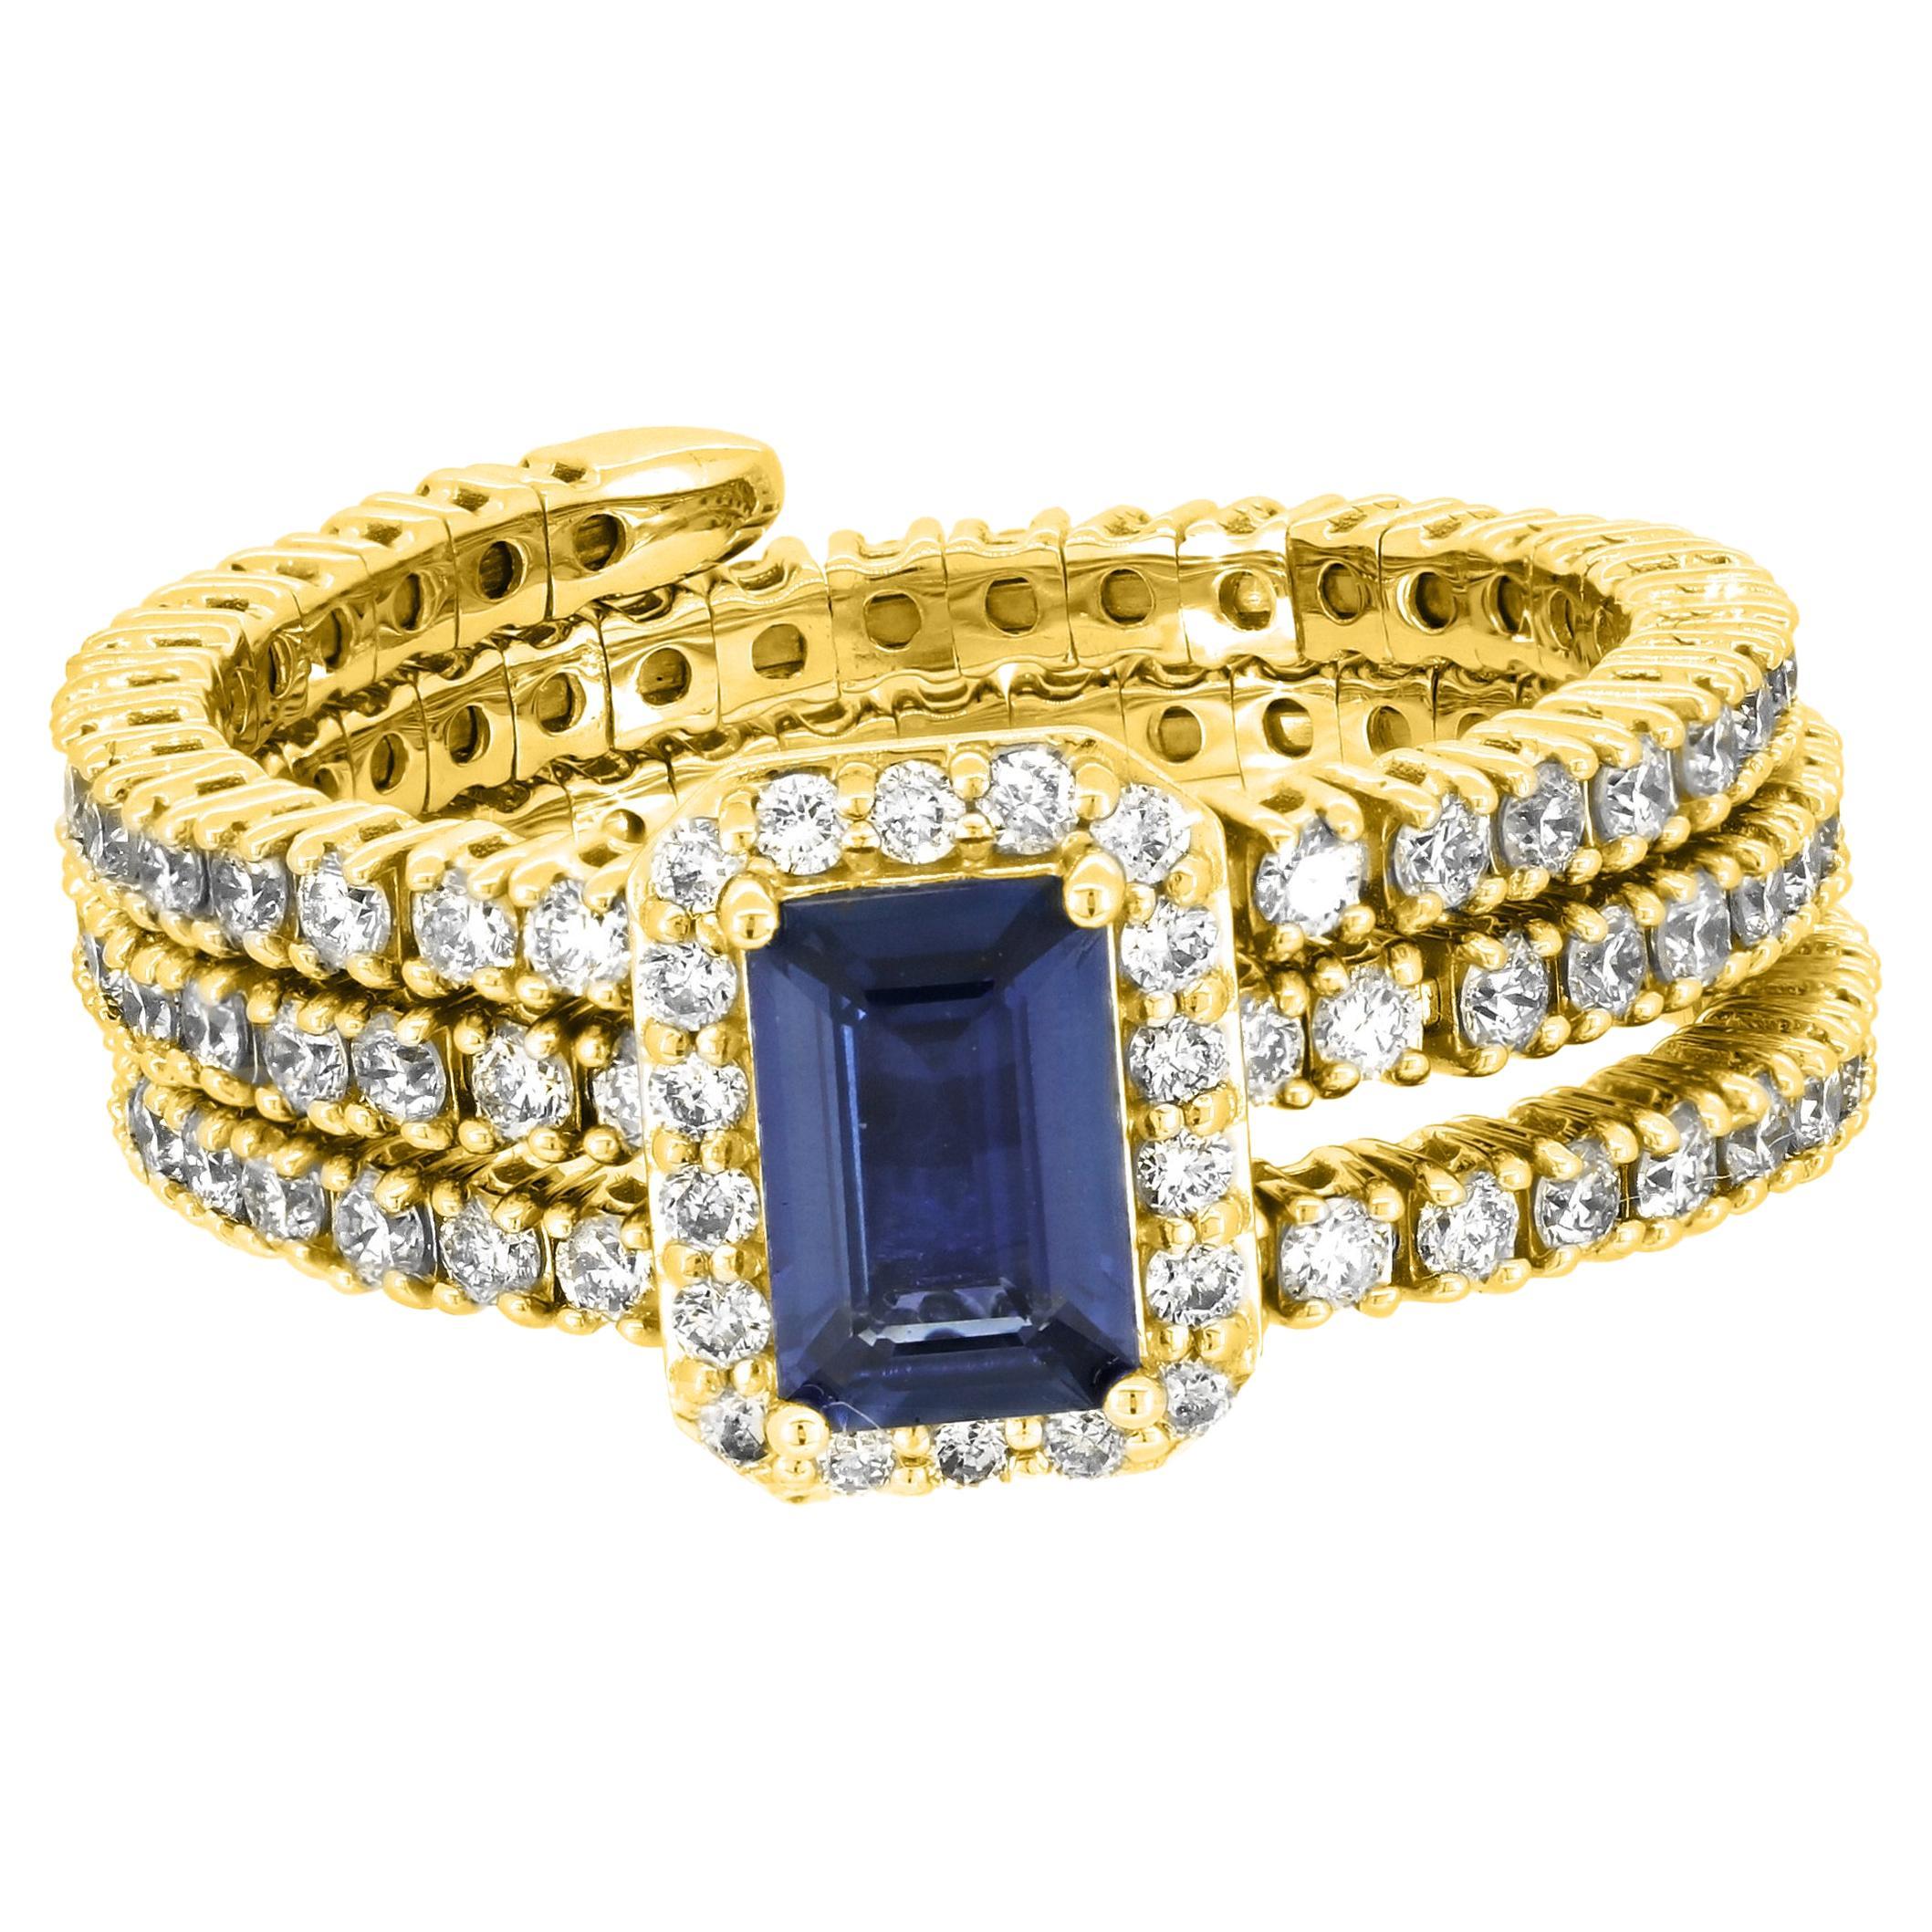 Gemistry 1.57cttw Blue Sapphire and Diamond Adjustable Ring in 18k Yellow Gold For Sale